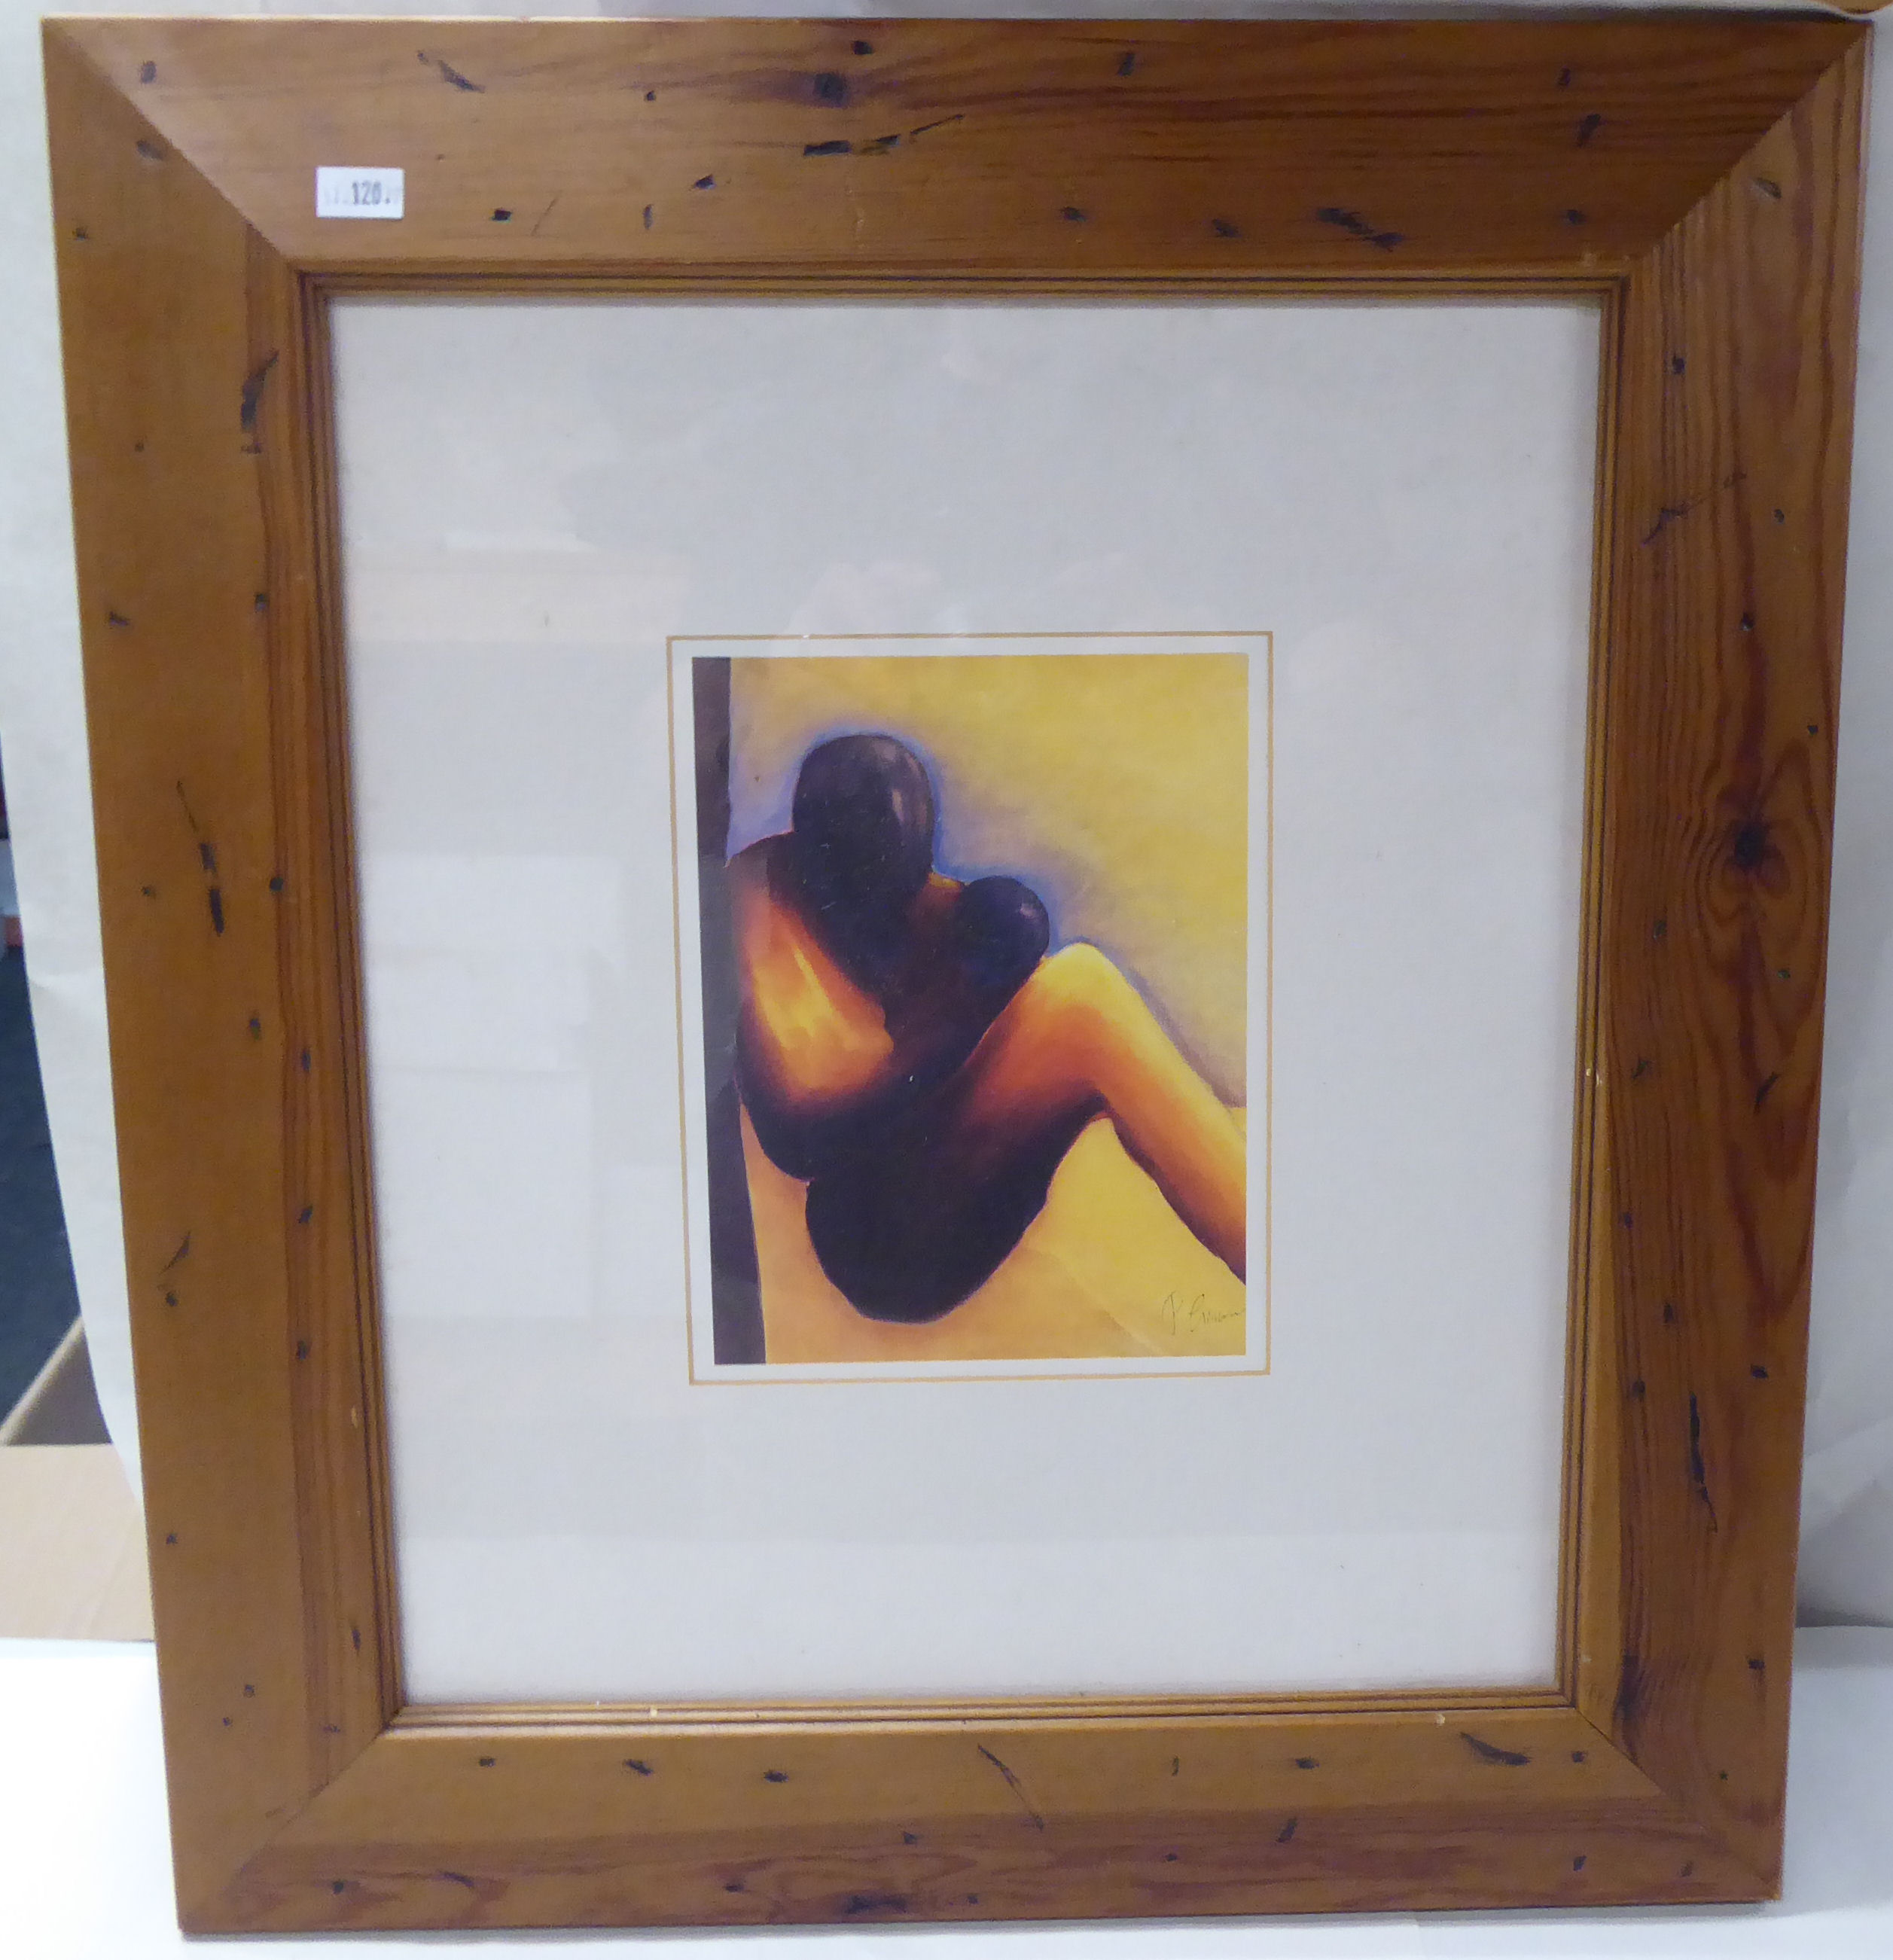 Framed pictures and prints: to include after Paul Mann - a colourful print  24" x 35" - Image 19 of 26